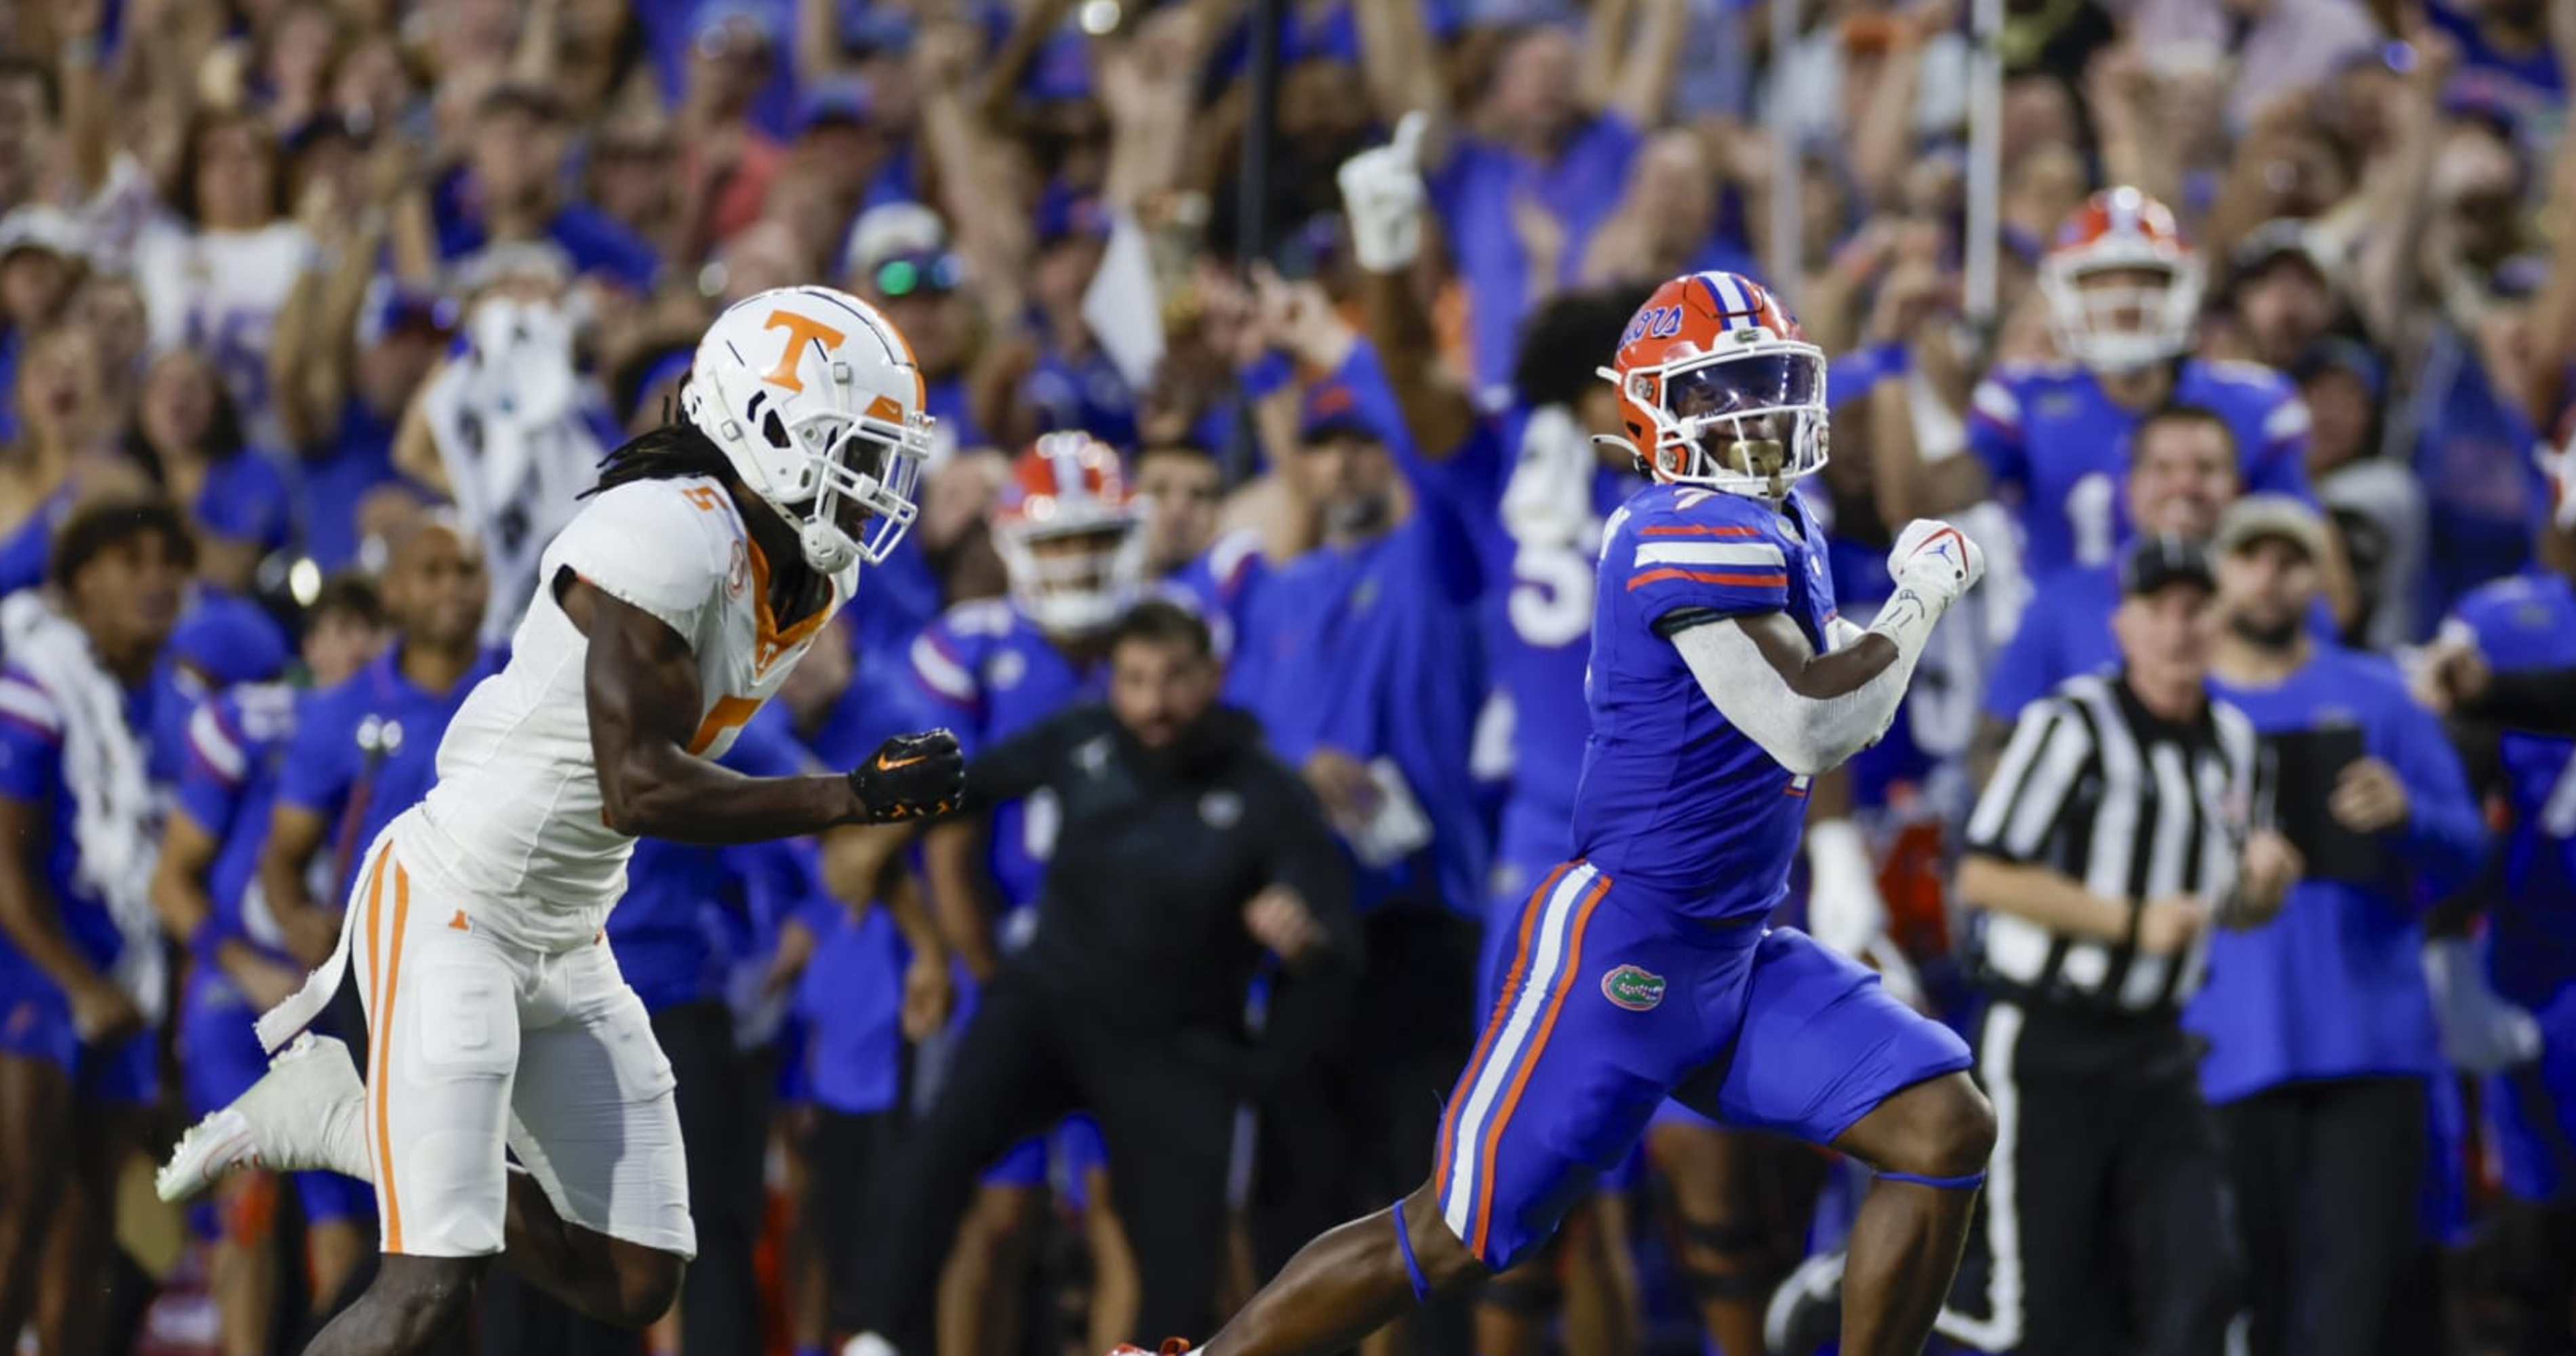 What to make of Florida Gators, FSU football and Miami all in AP top 25